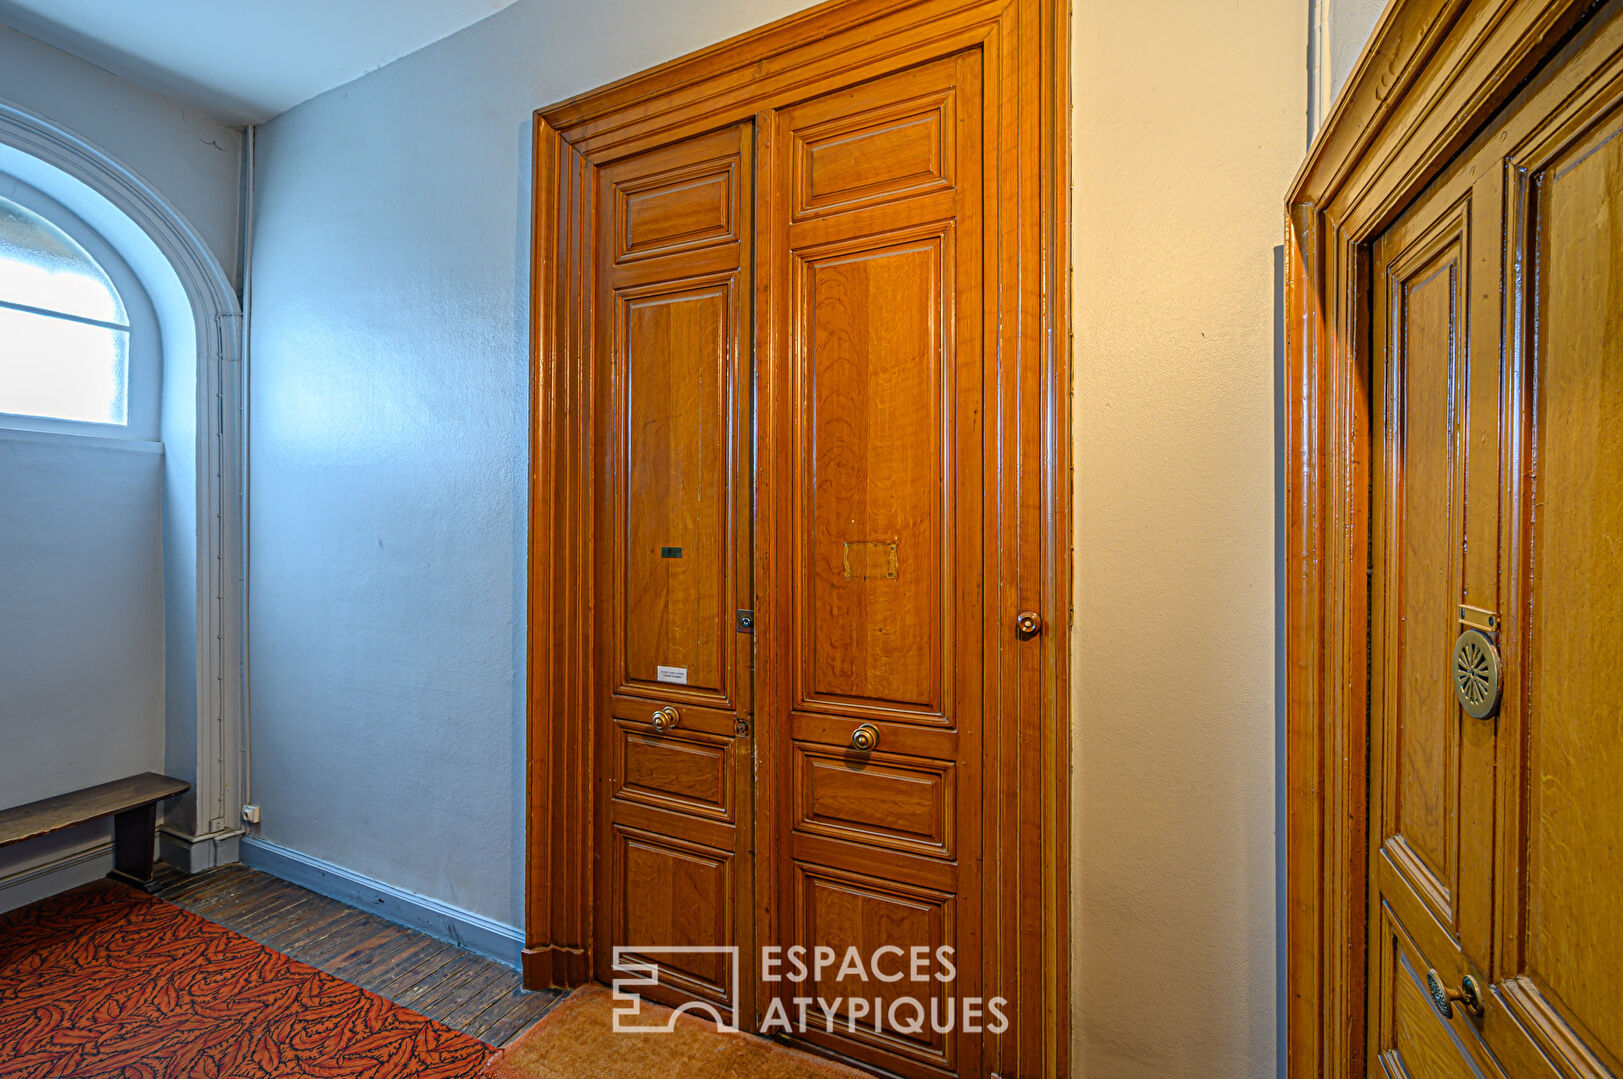 Elegant bourgeois apartment in the heart of Vannes